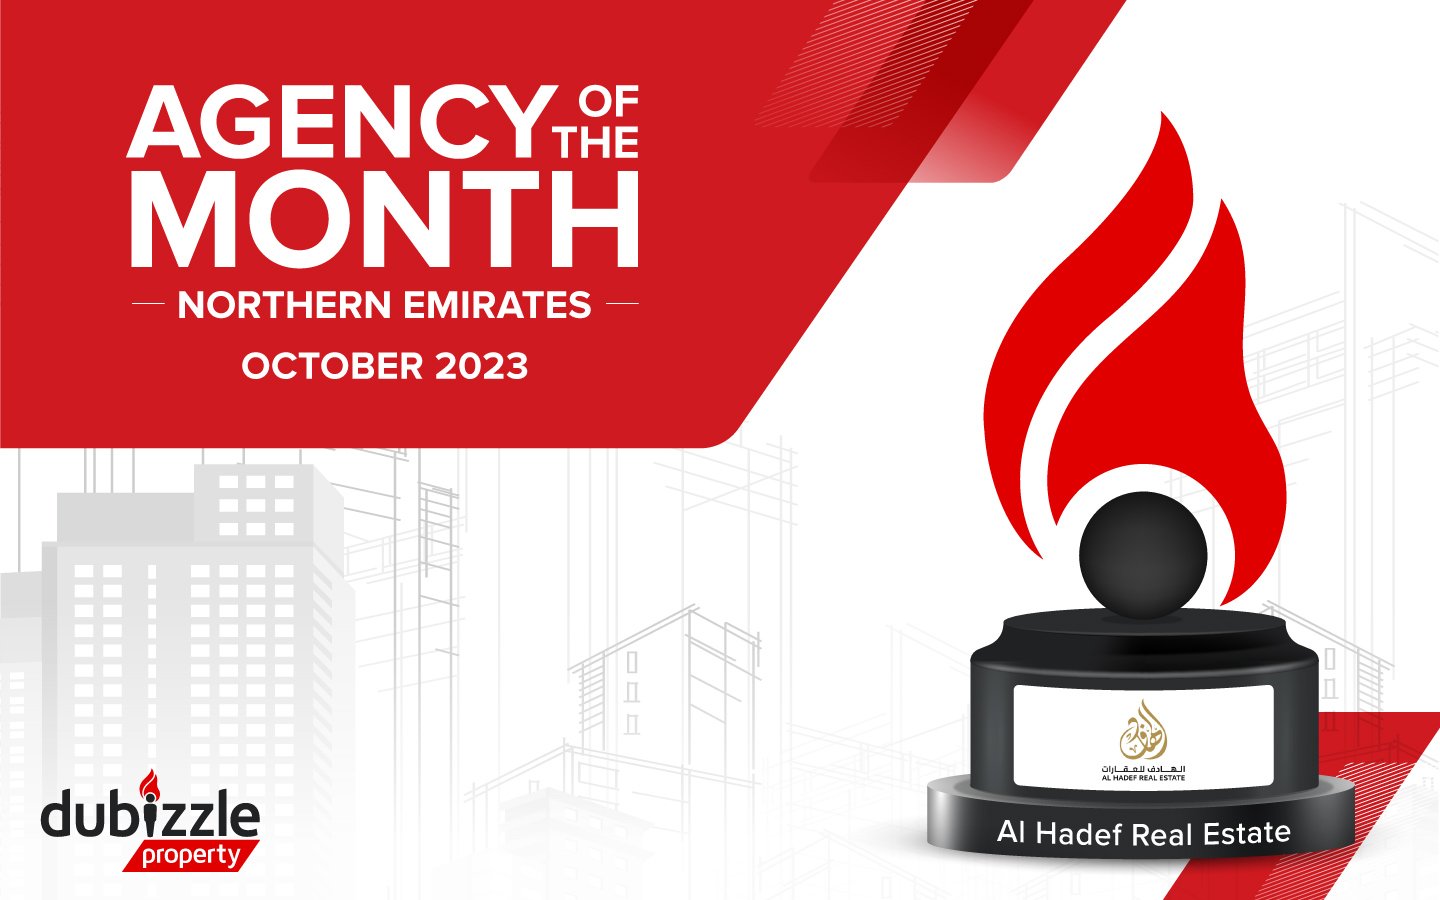 Agency of the month Northern Emirates october 2023